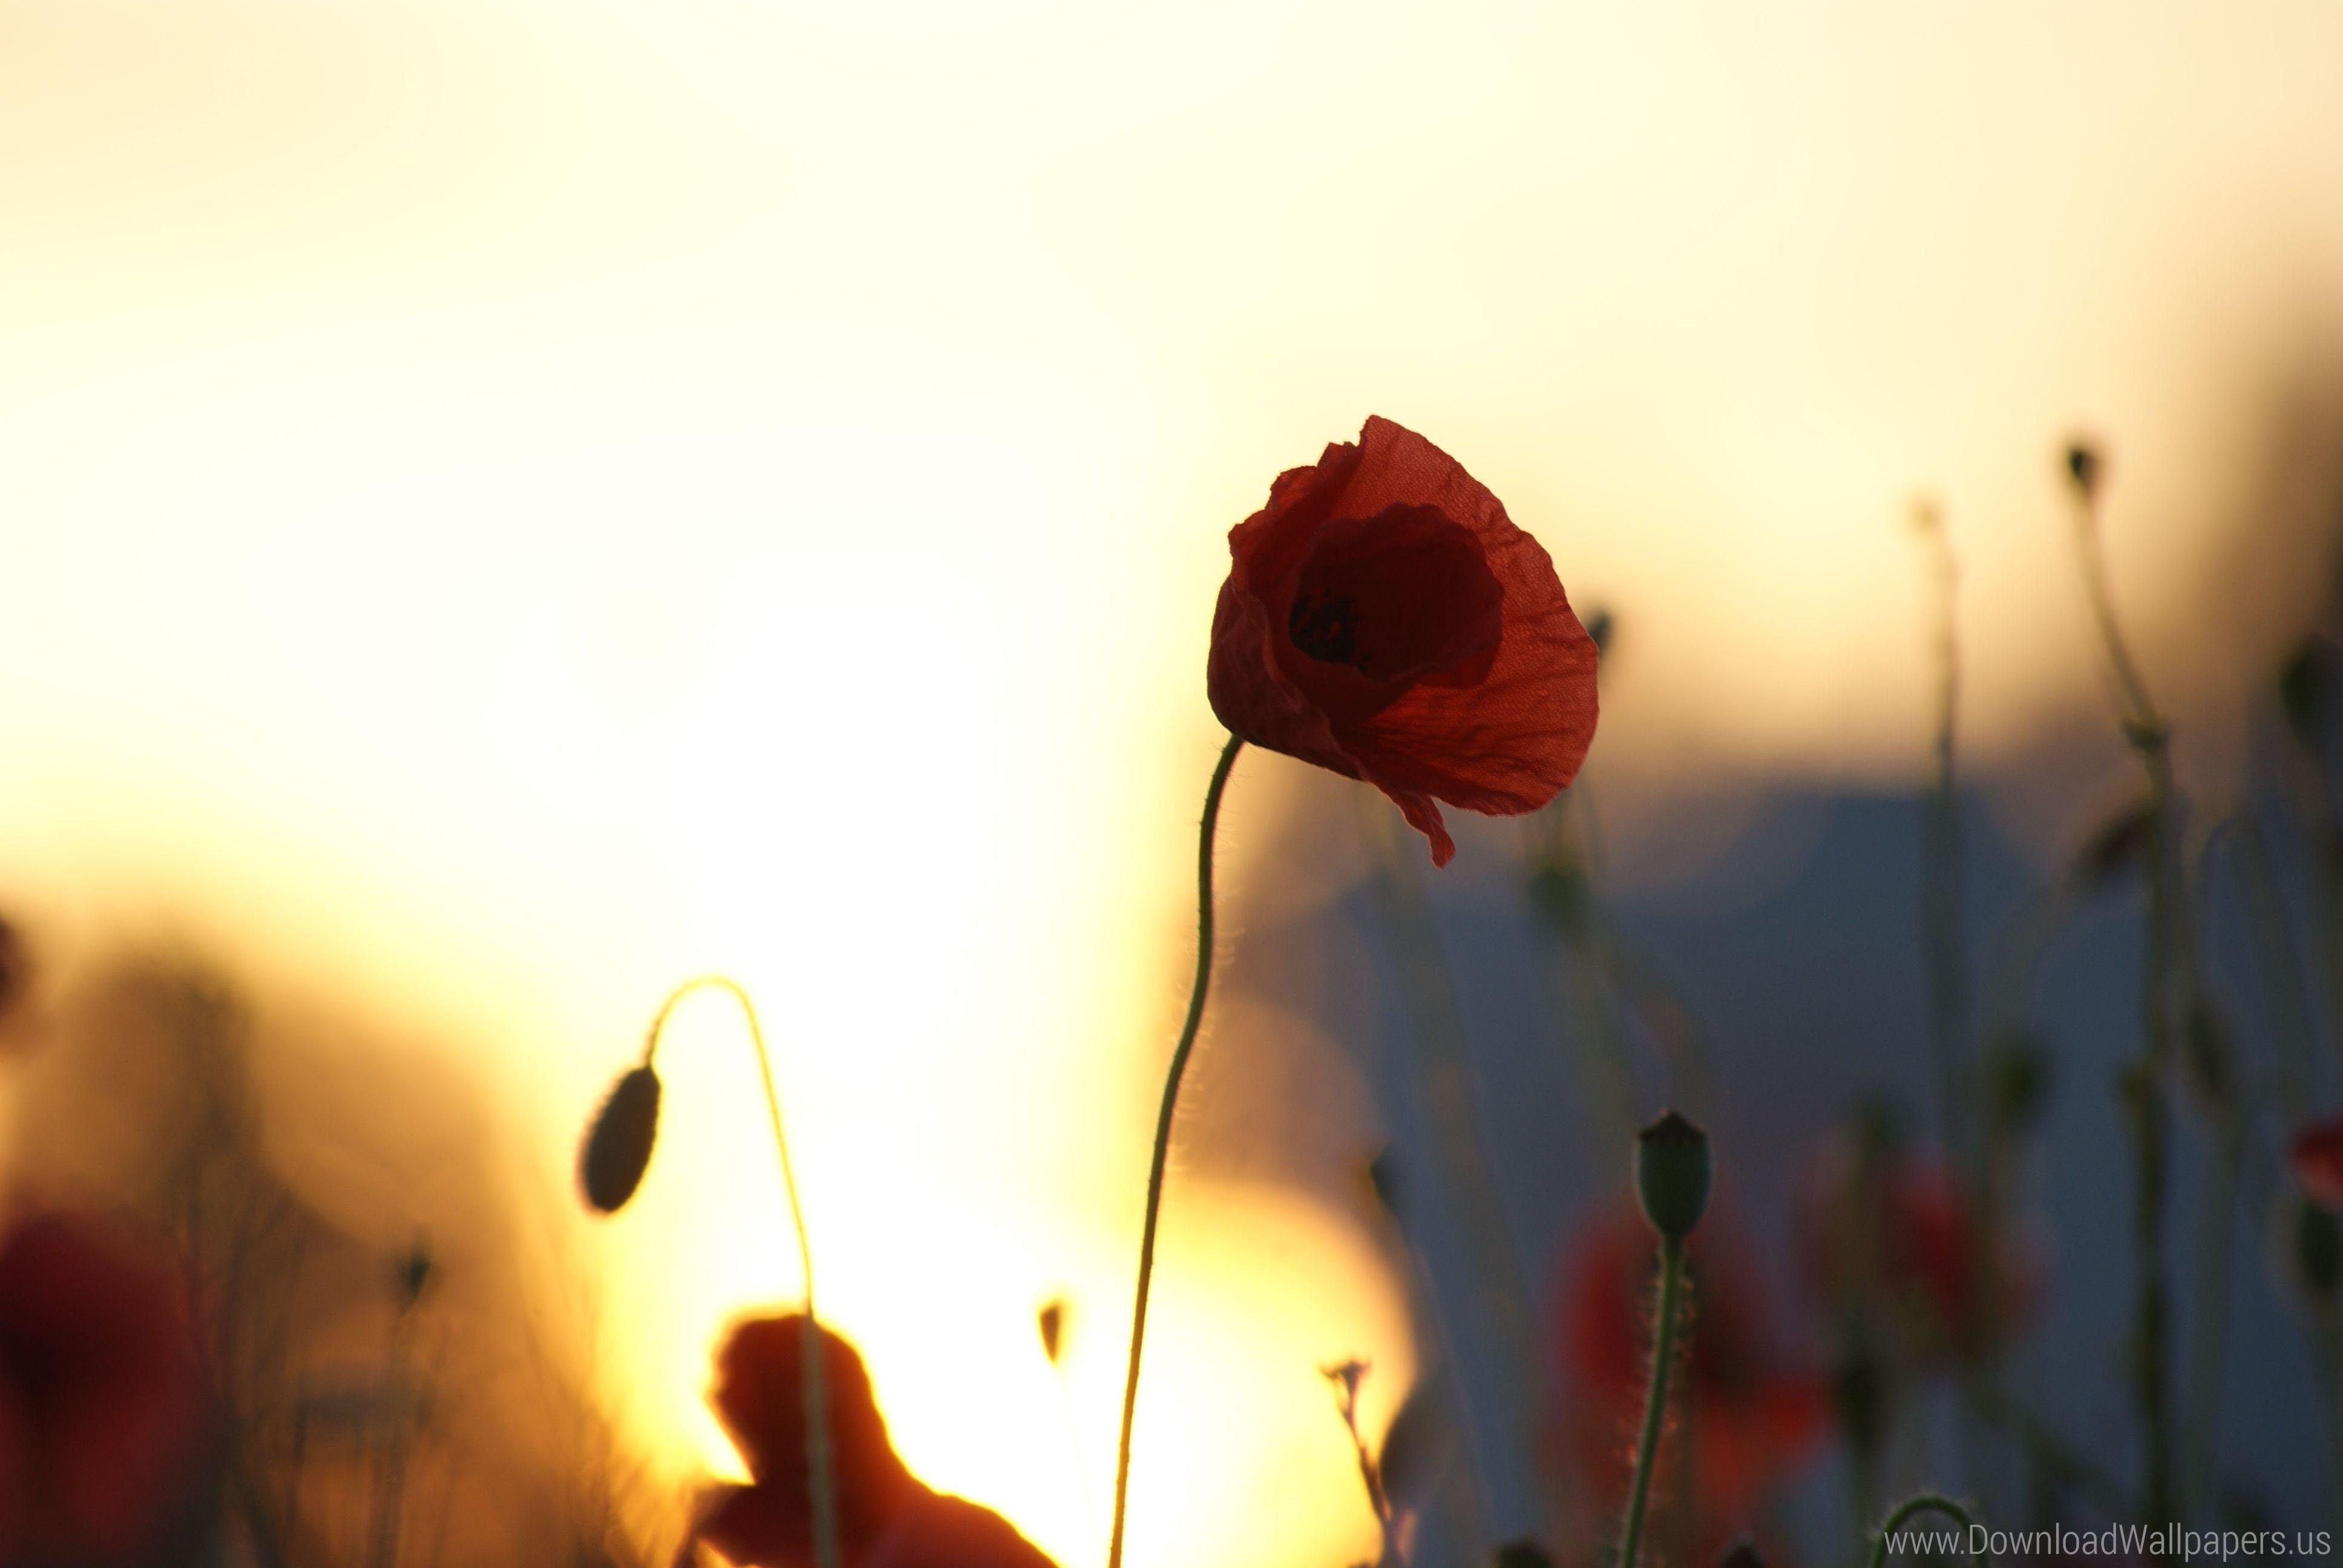 Close Up, Flowers Field, Poppies, Poppy, Silhouettes, Sky, Sunset